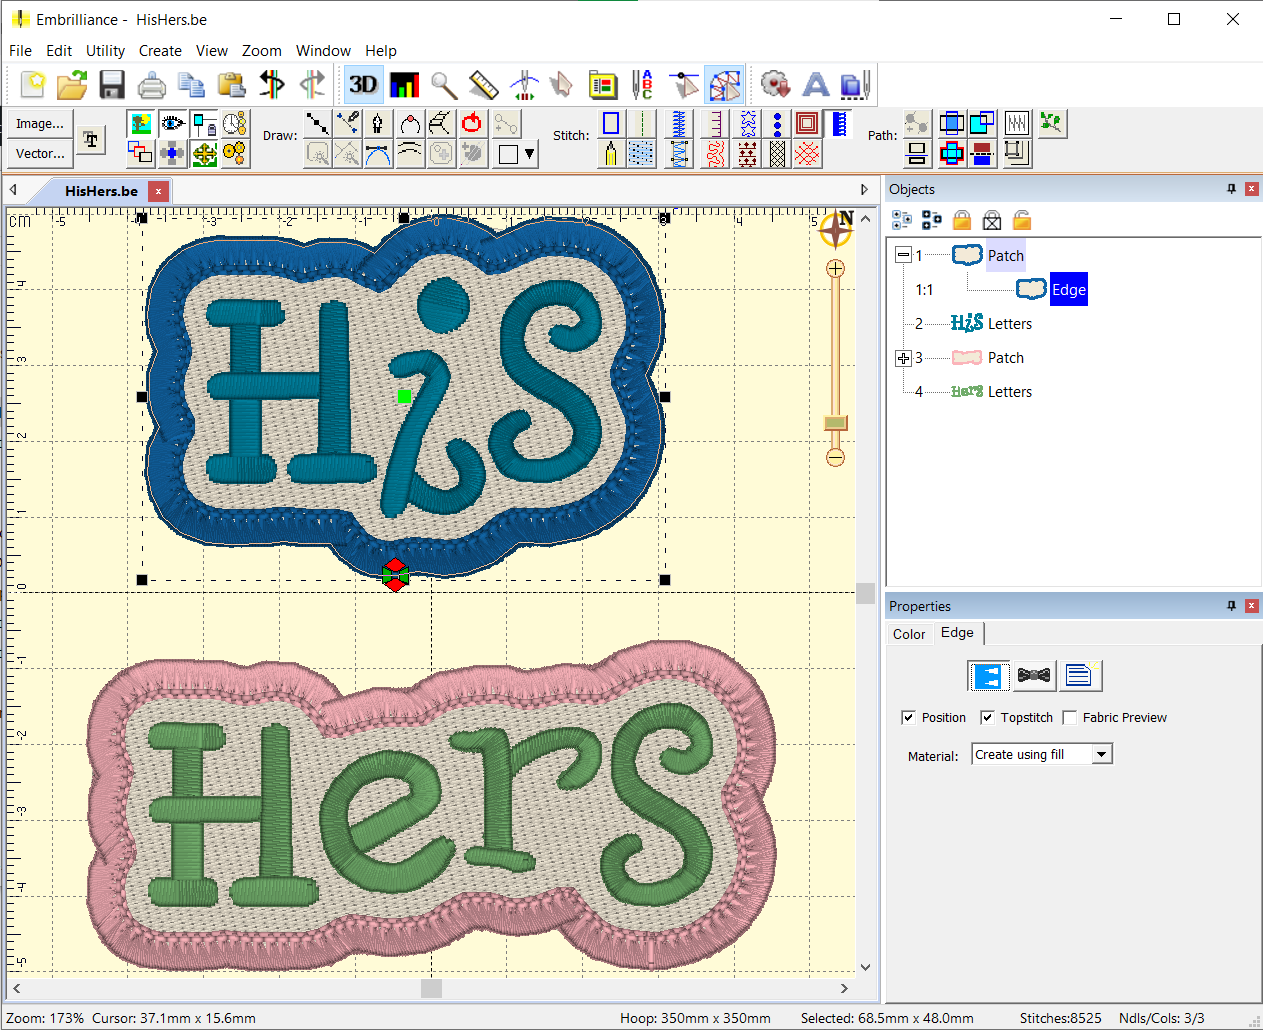 how to make raised text in sew art